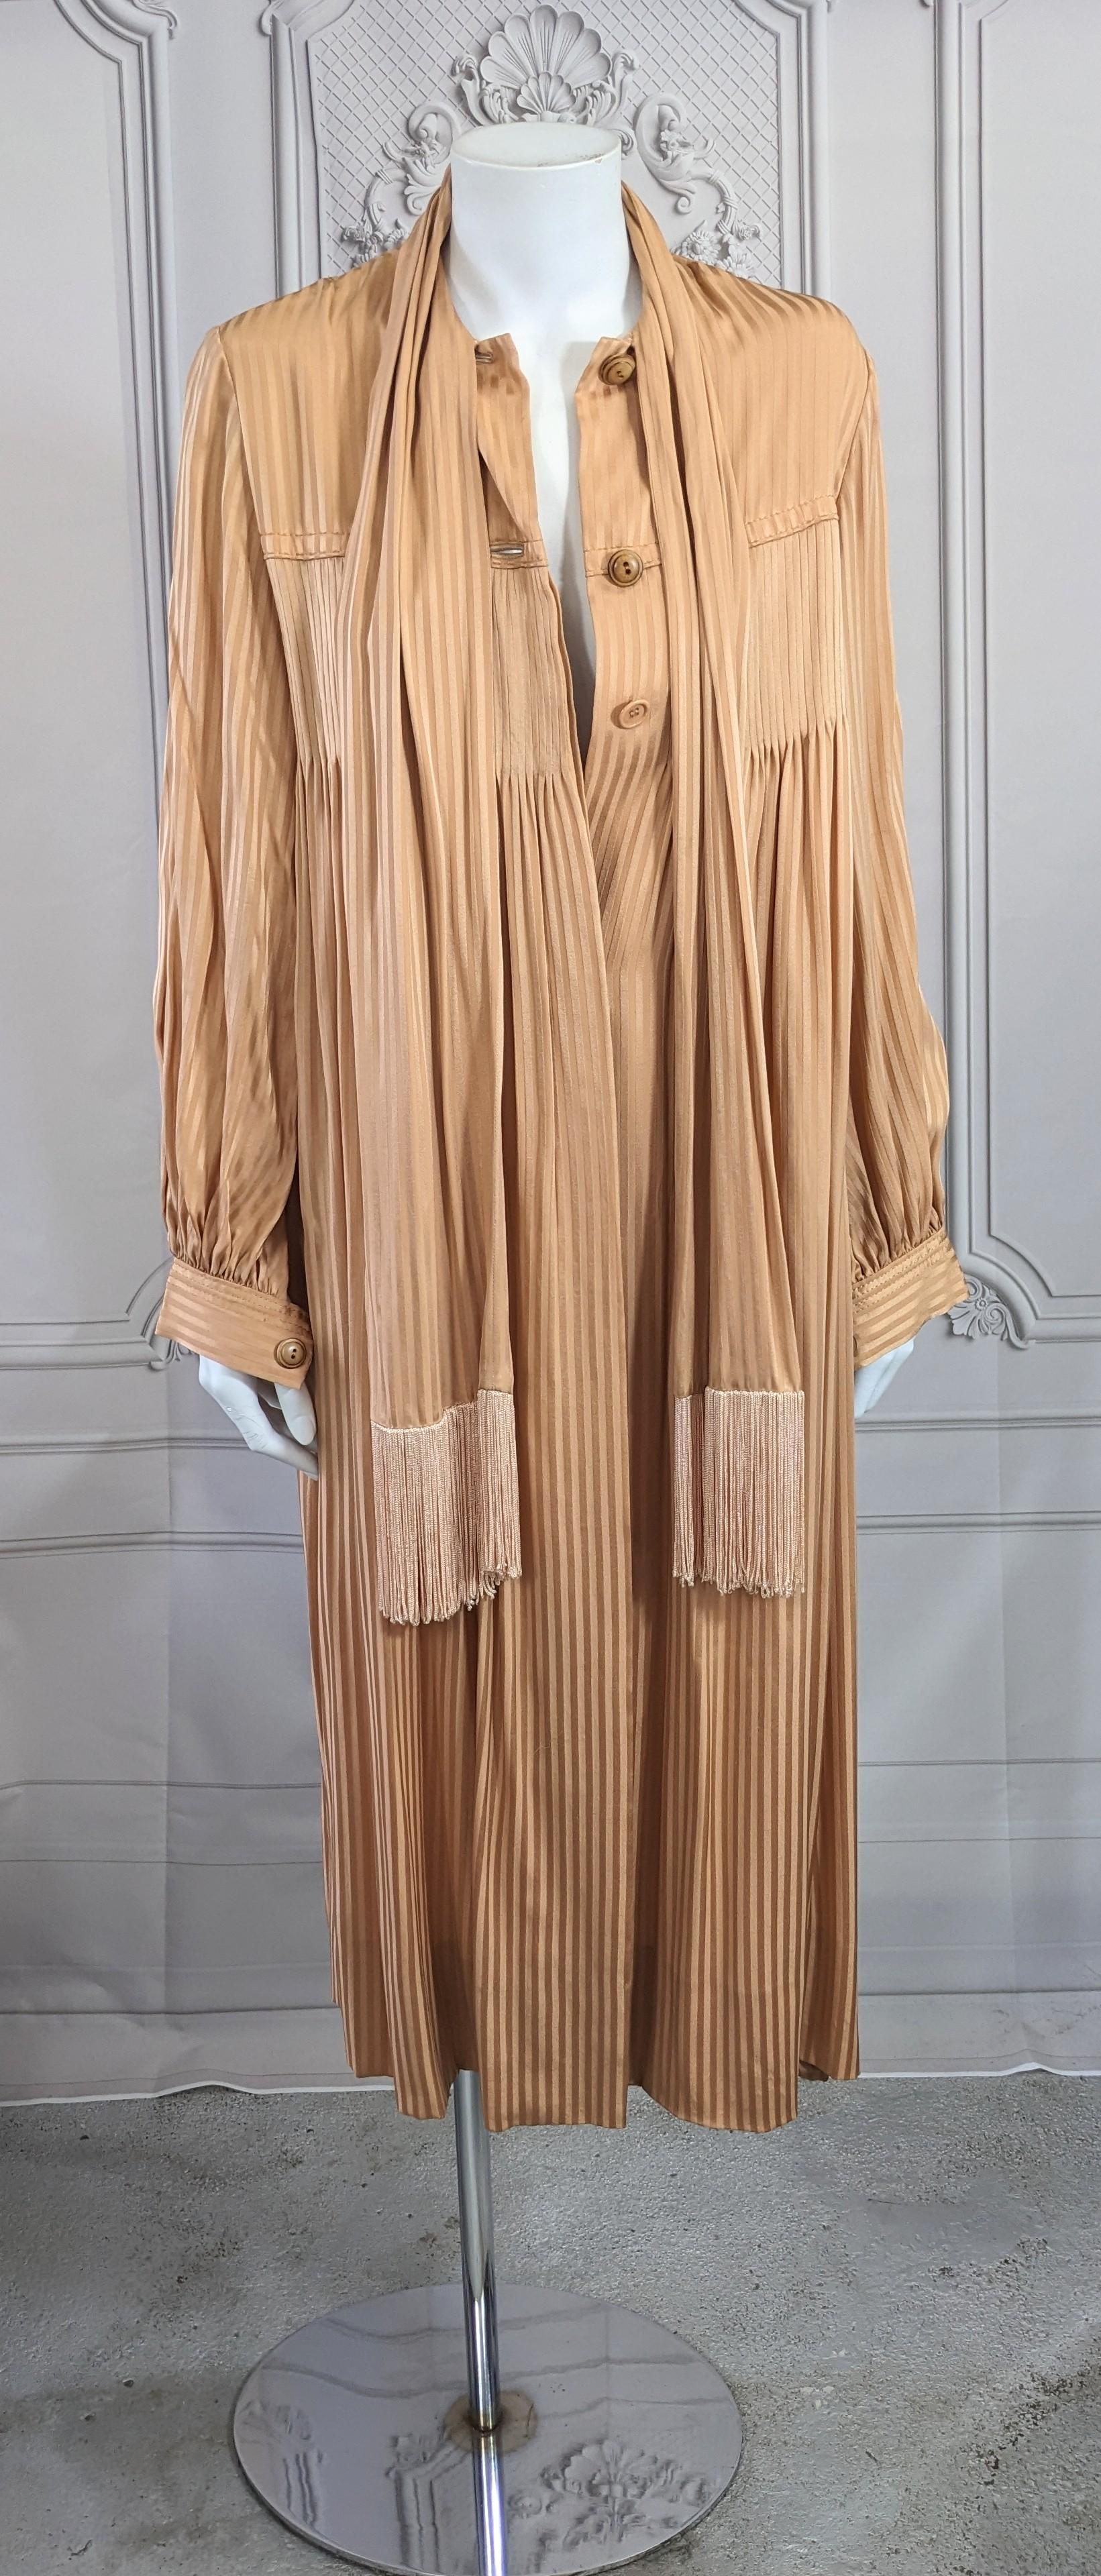 Galanos Silk Crepe Tucked Chemise In Good Condition For Sale In New York, NY